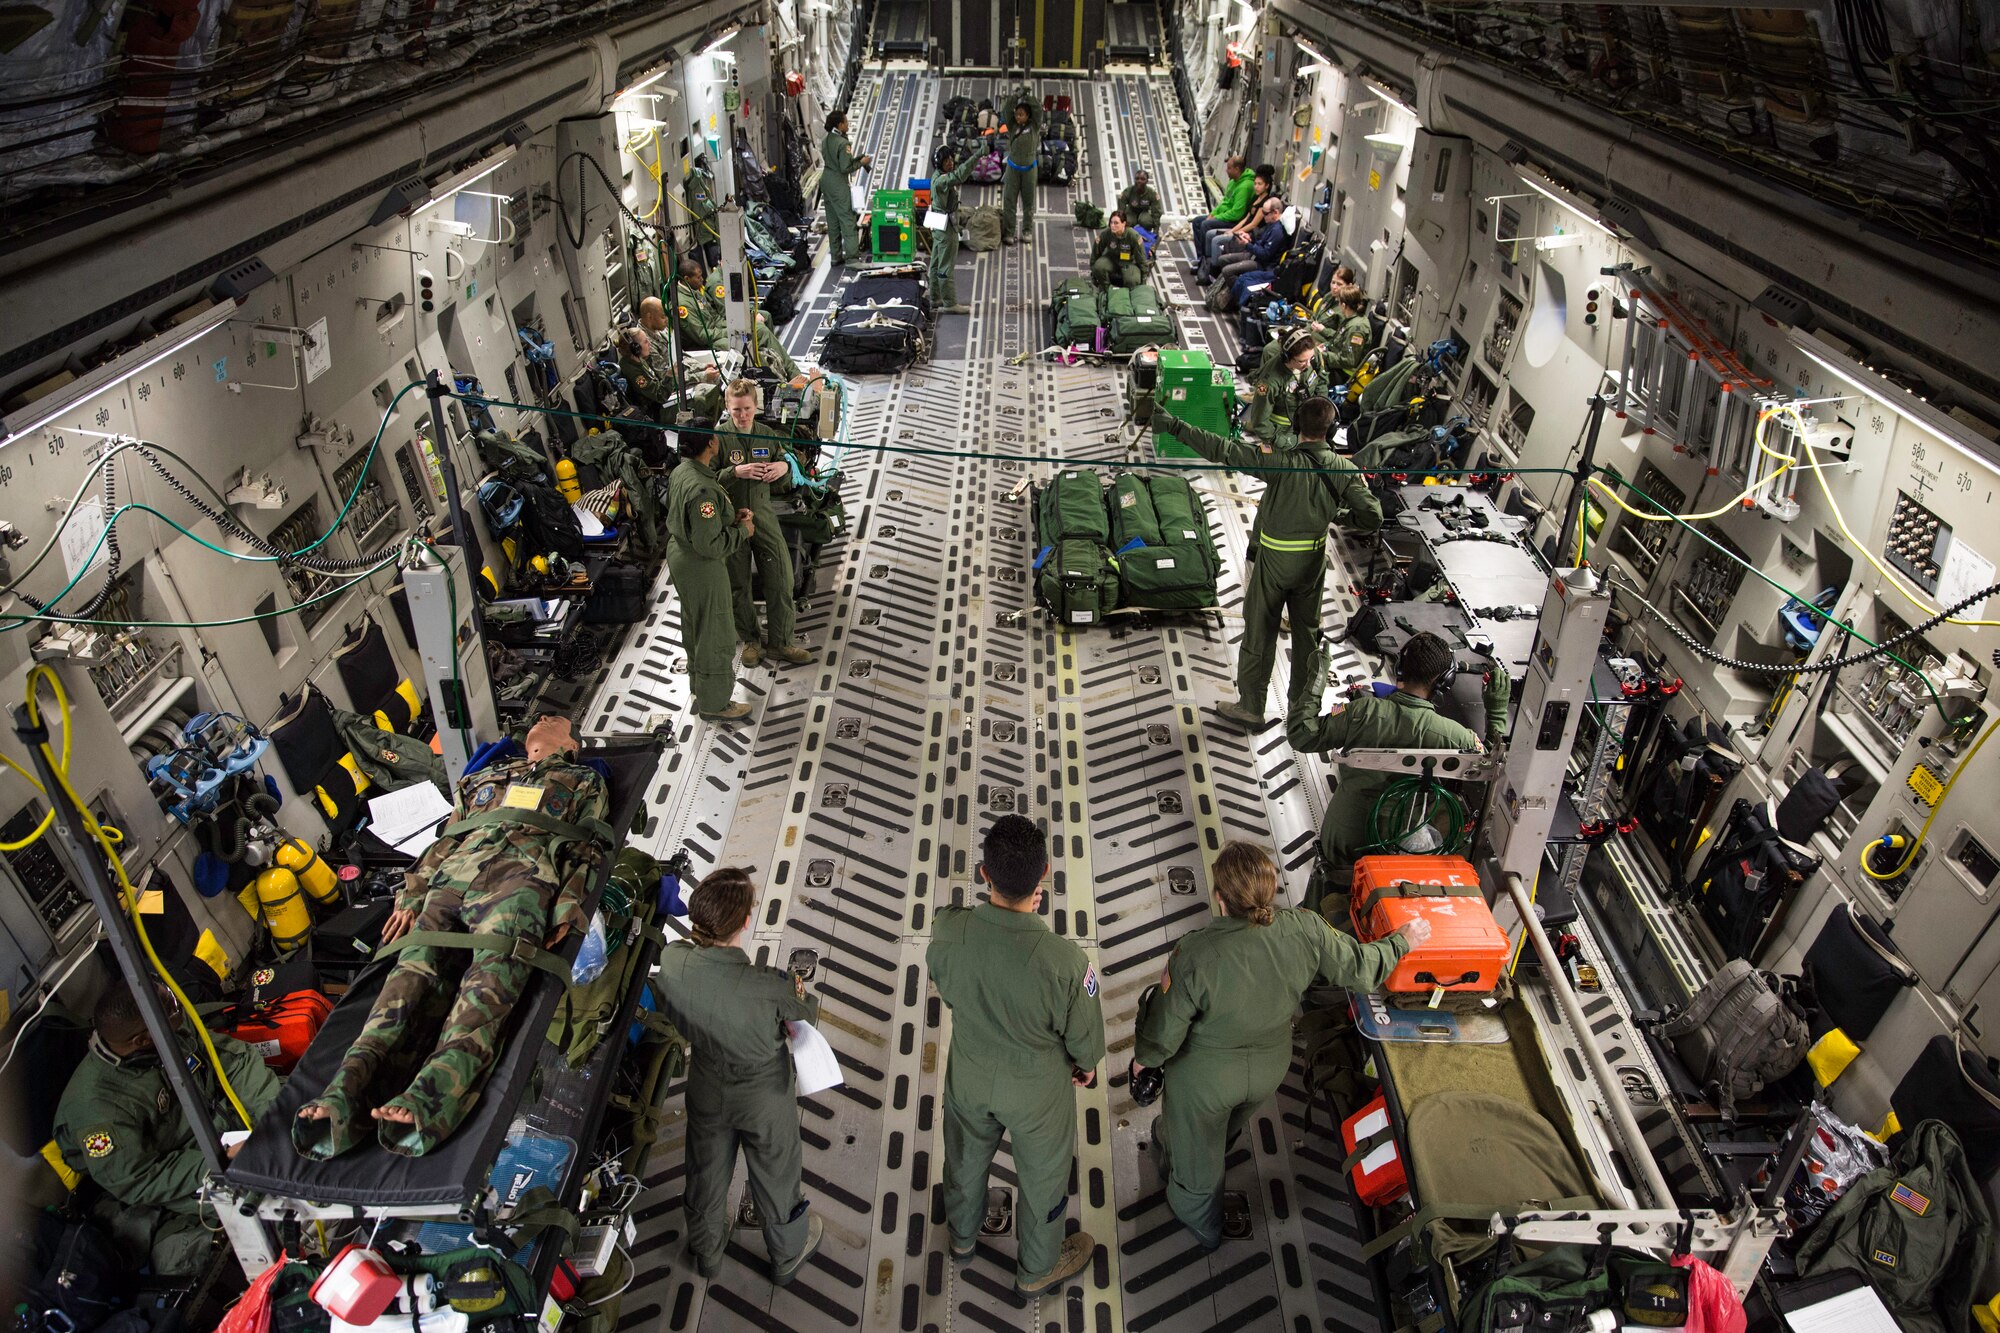 Reservists assigned to the 459th Air Refueling Wing at Joint Base Andrews, Md. conduct aeromedical training in a C-17 Globemaster III Feb. 22, 2015 during a training mission in San Juan, Puerto Rico. The mission was part of a three day fly-away with Airmen from the 315th Airlift Wing at Joint Base Charleston, S.C. and aeromedical Airmen from the 459th Air Refueling Wing at Joint Base Andrews, Md. The training mission was a cost-effective means to accomplish currency items and evaluations for flight crew members and provided C-17 familiarization and proficiency training for aeromedical Airmen. (U.S. Air Force Photo/Tech. Sgt. Shane Ellis)